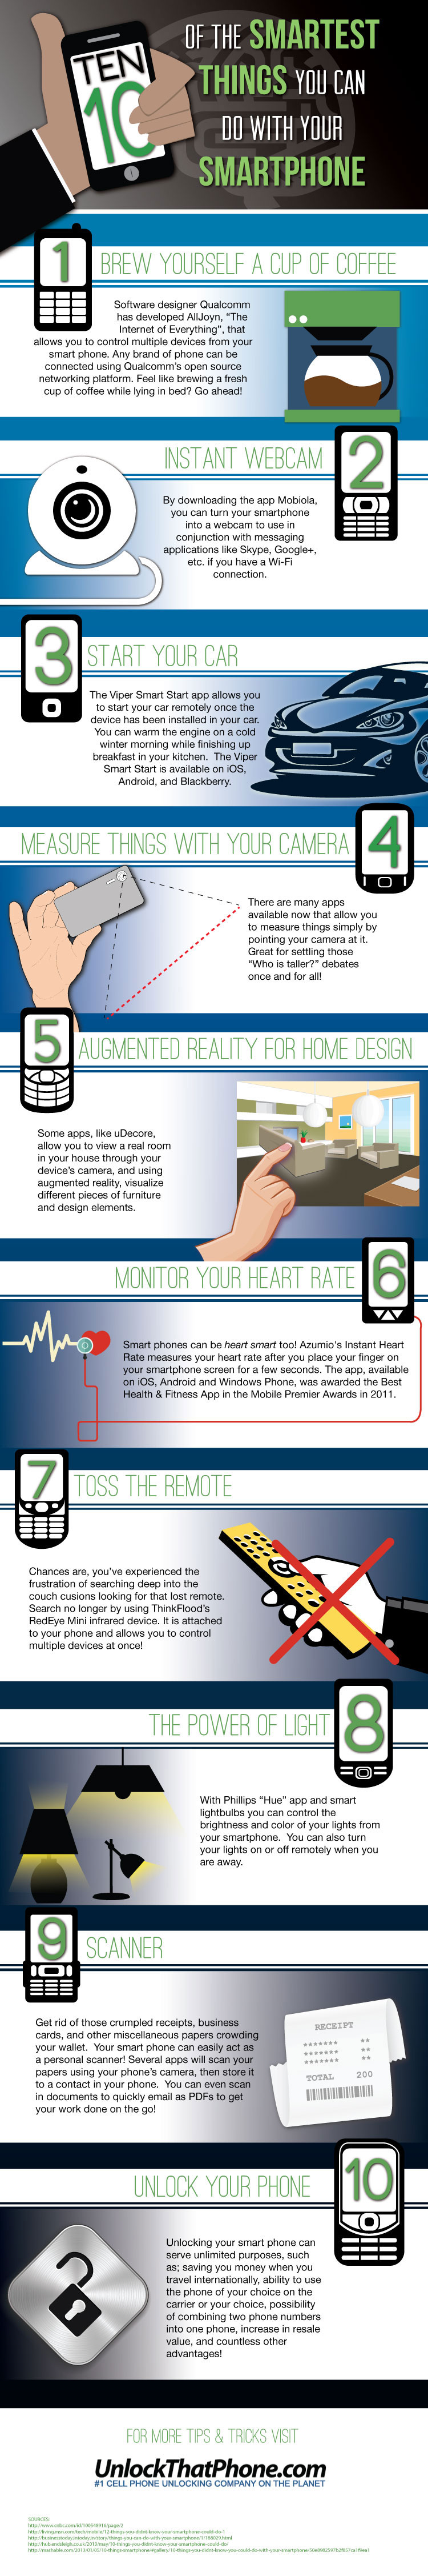 10 Really Smart Things You Can Do With Your Smartphone [Infographic]